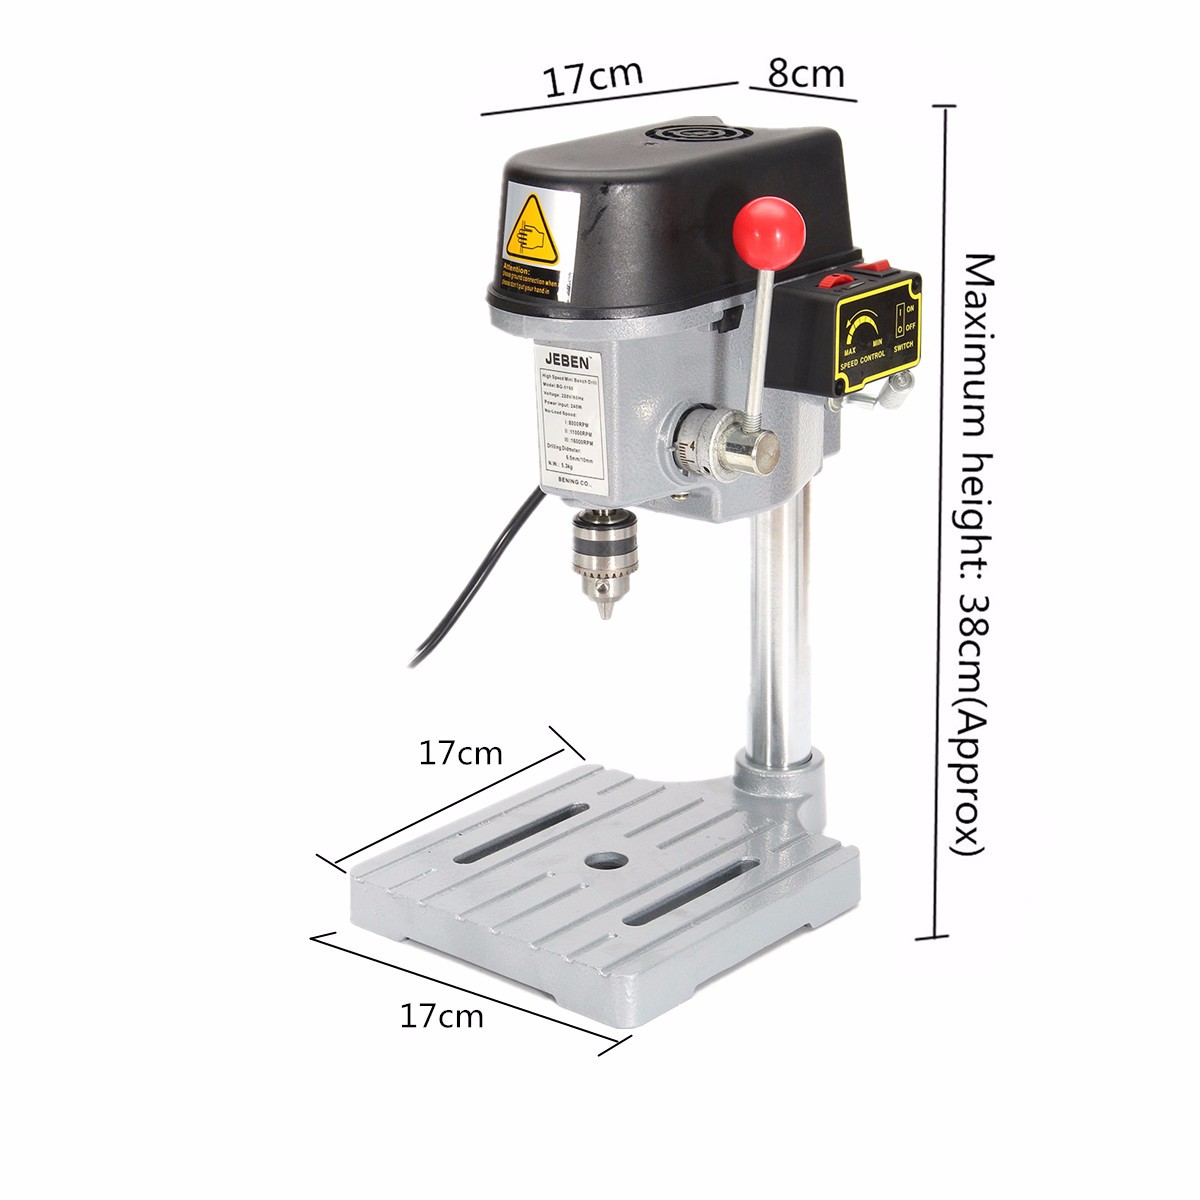 Drillpro-220V-340W-Electric-Drill-Stand-Mini-Table-Top-Bench-Drill-Stand-Holder-DIY-Bracket-Fixed-Fr-1112052